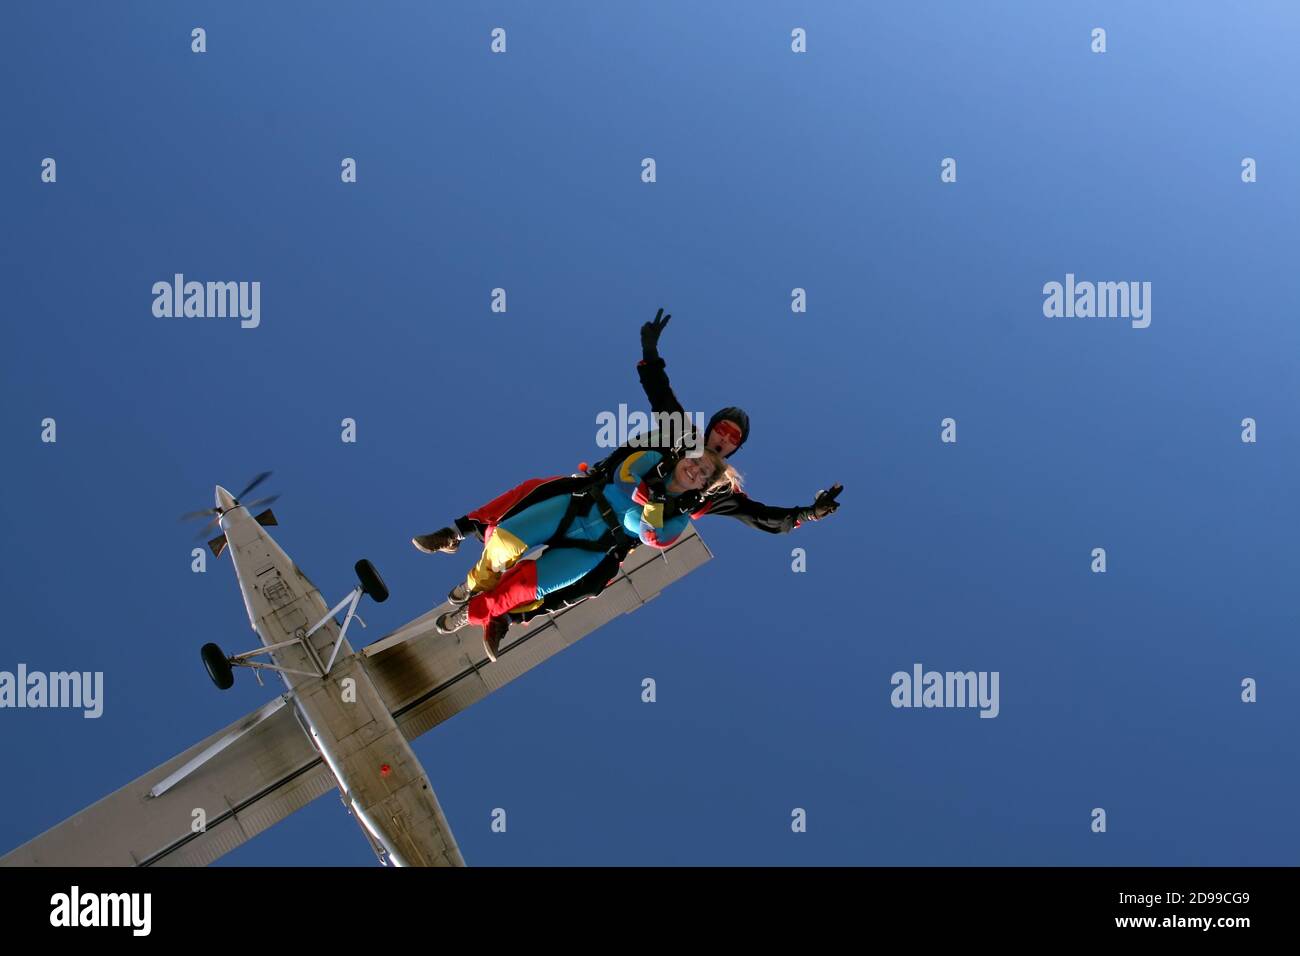 Skydive tandem jumping ou the plane Stock Photo